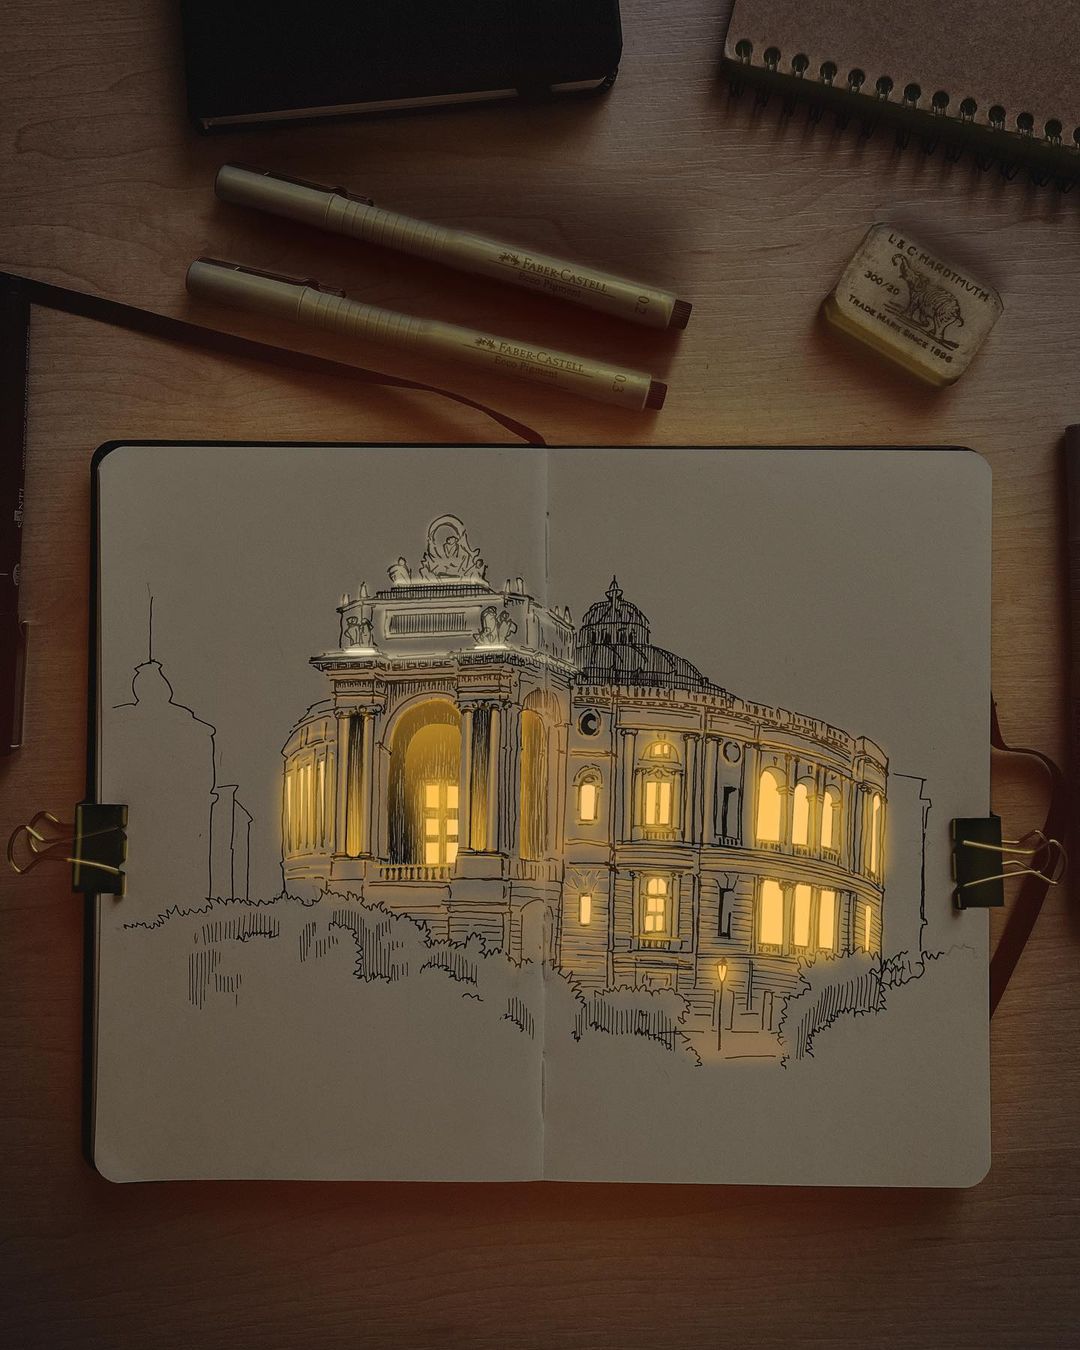 Glowing Archisketch Gorgeously Illuminated Architectural Sketches By Nikita Busyak (6)